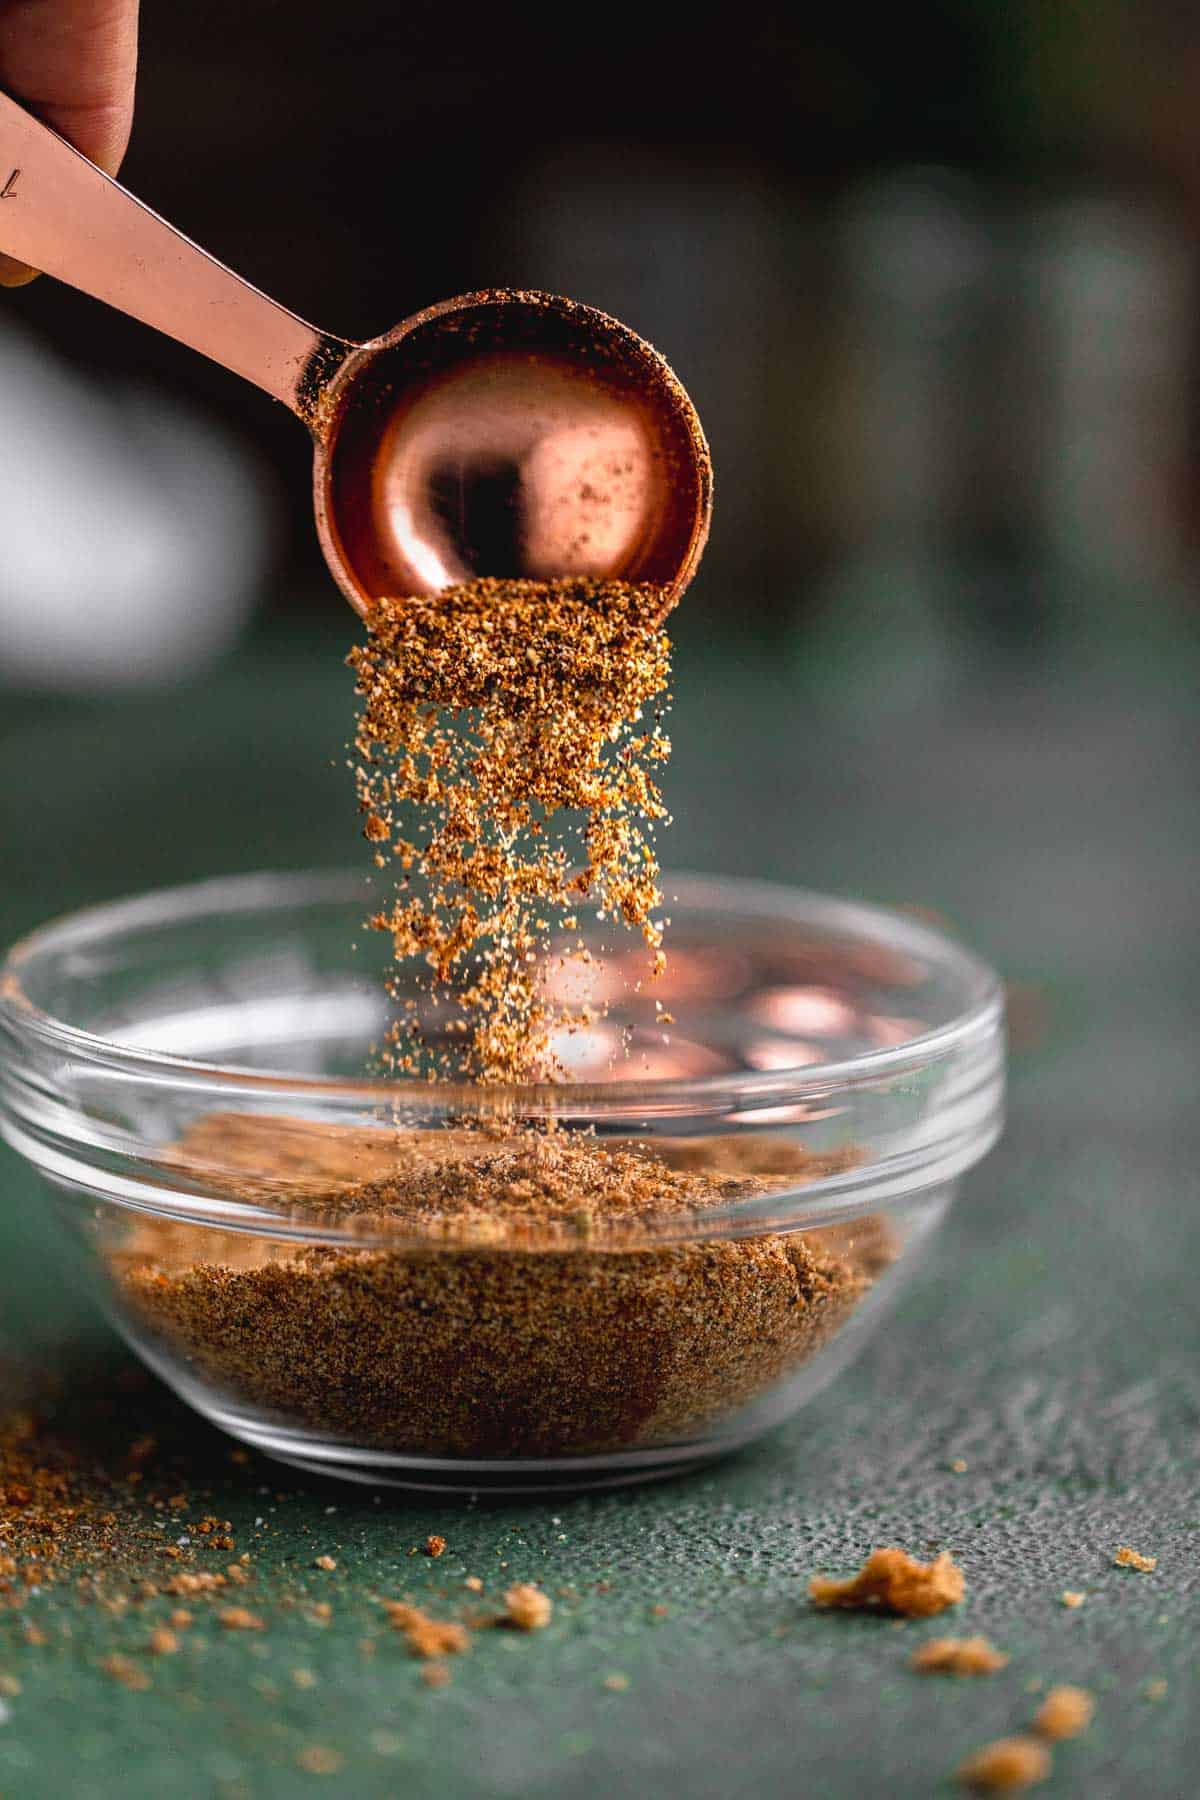 Chicken taco seasoning being poured out of a tablespoon into a small dish.